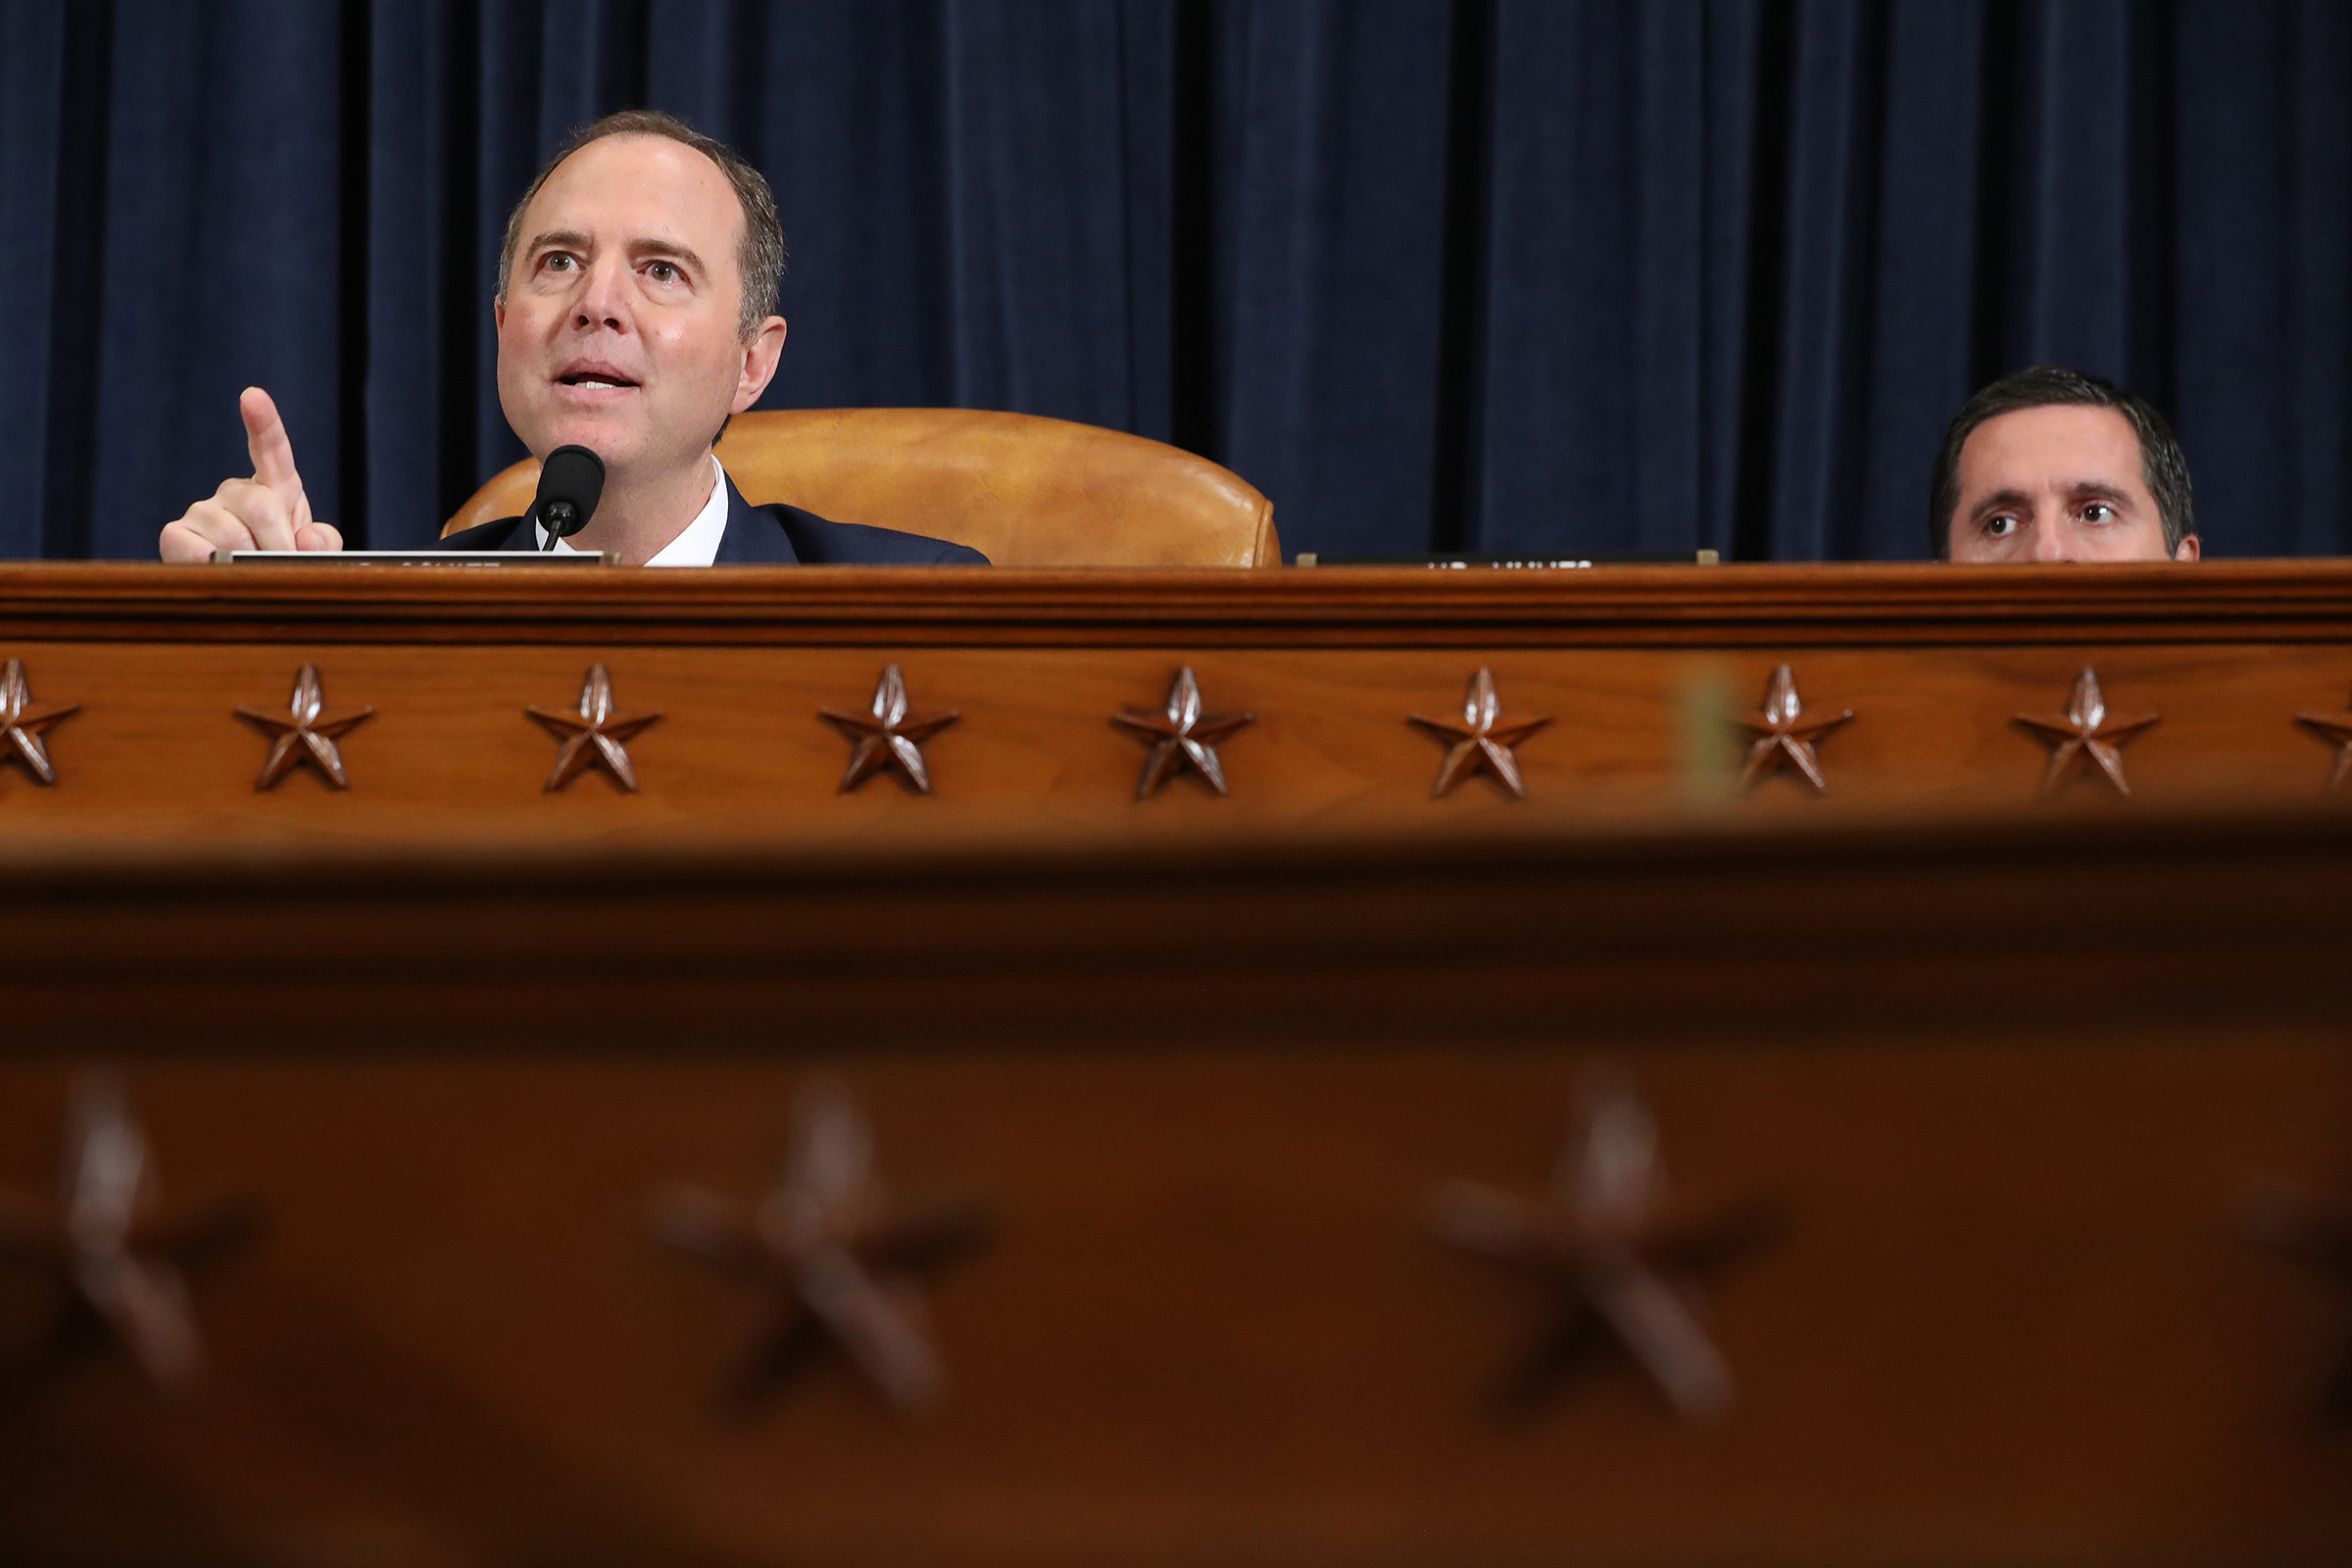 House Intelligence Committee Chairman Rep. Adam Schiff (D-CA) (L) delivers closing remarks as ranking member Rep. Devin Nunes (R-CA) listens at the end of an impeachment inquiry hearing on Capitol Hill on Nov. 21, 2019 in Washington, DC. (Chip Somodevilla—Getty Images)